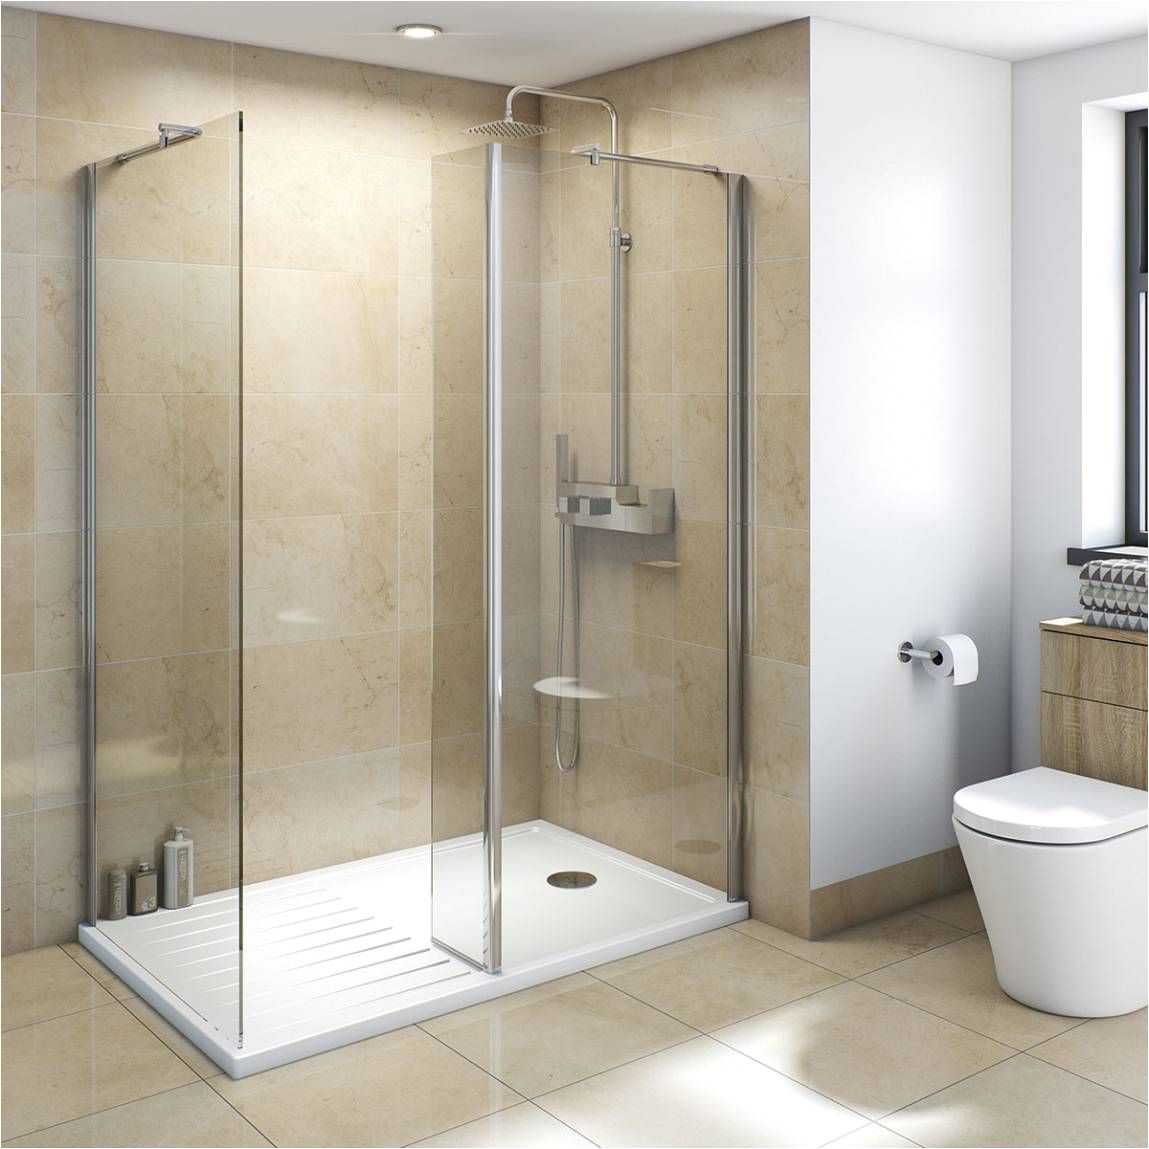 in shower pack is a contemporary and modernist design which incorporates a polished chrome profile modern chrome horizontal fixing bar and clear glass